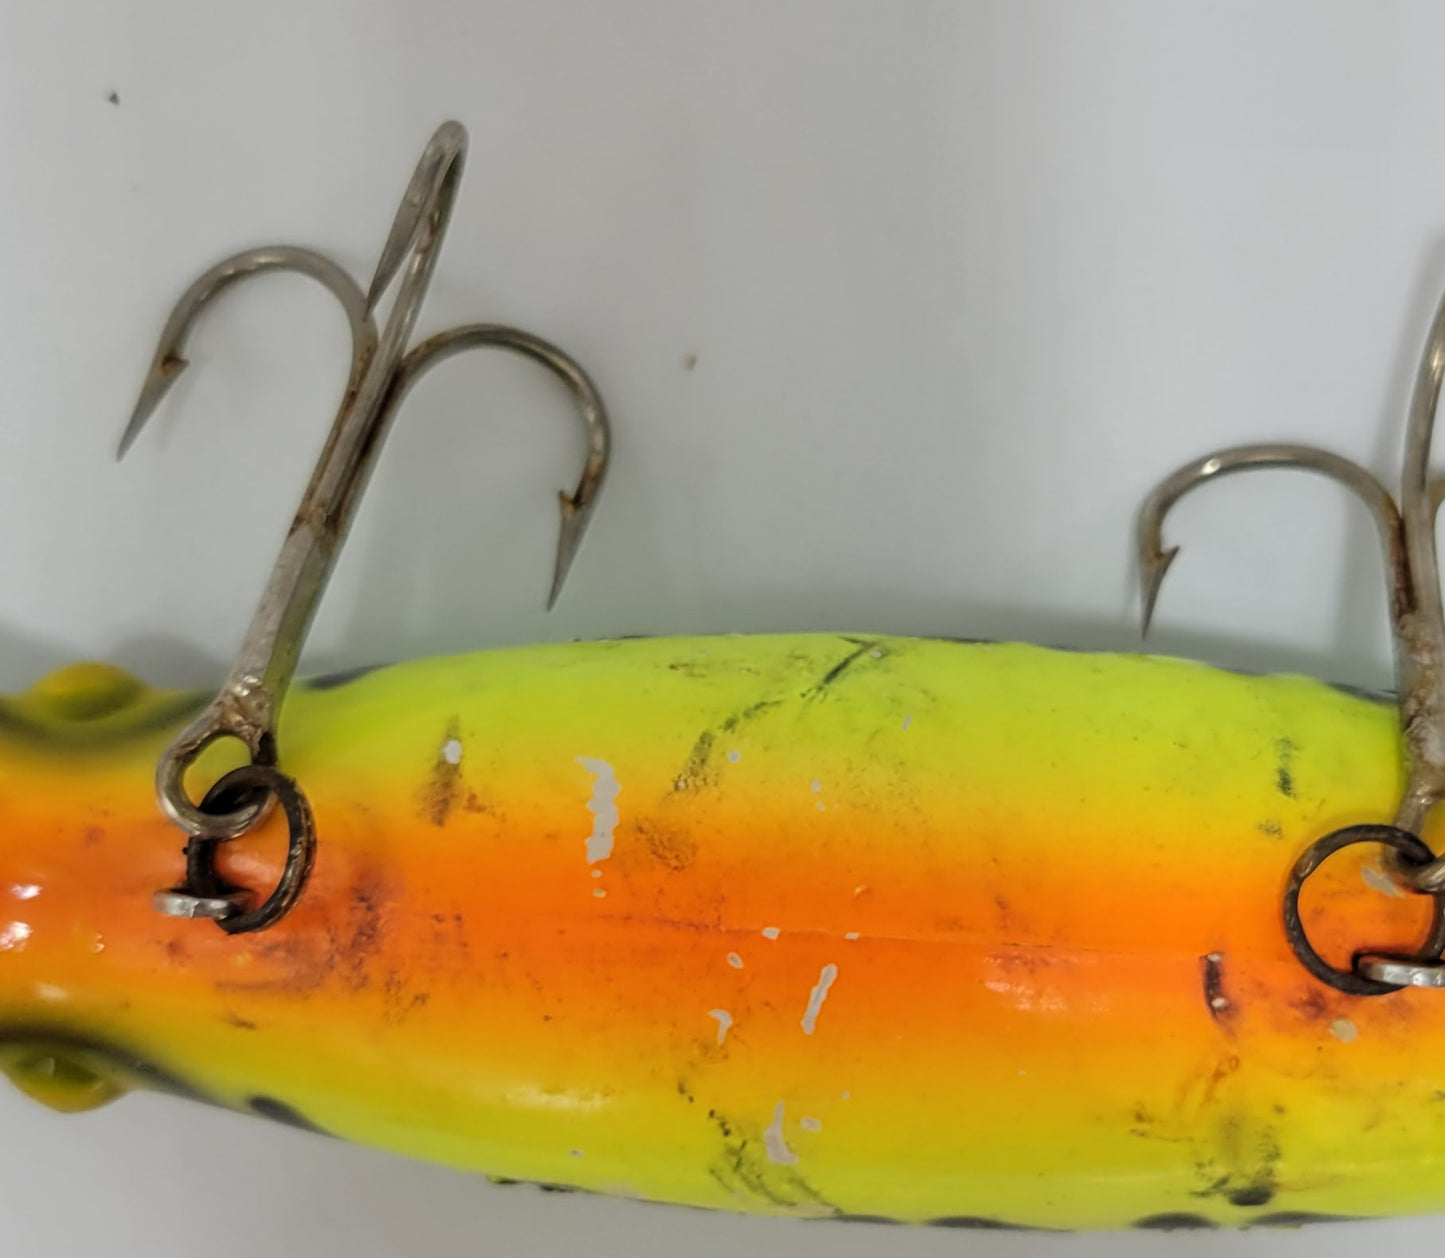 Drifter Tackle Company: The FAMOUS BELIEVER- MUSKIE-SALMON-LAKE TROUT-PIKE LURE 10"